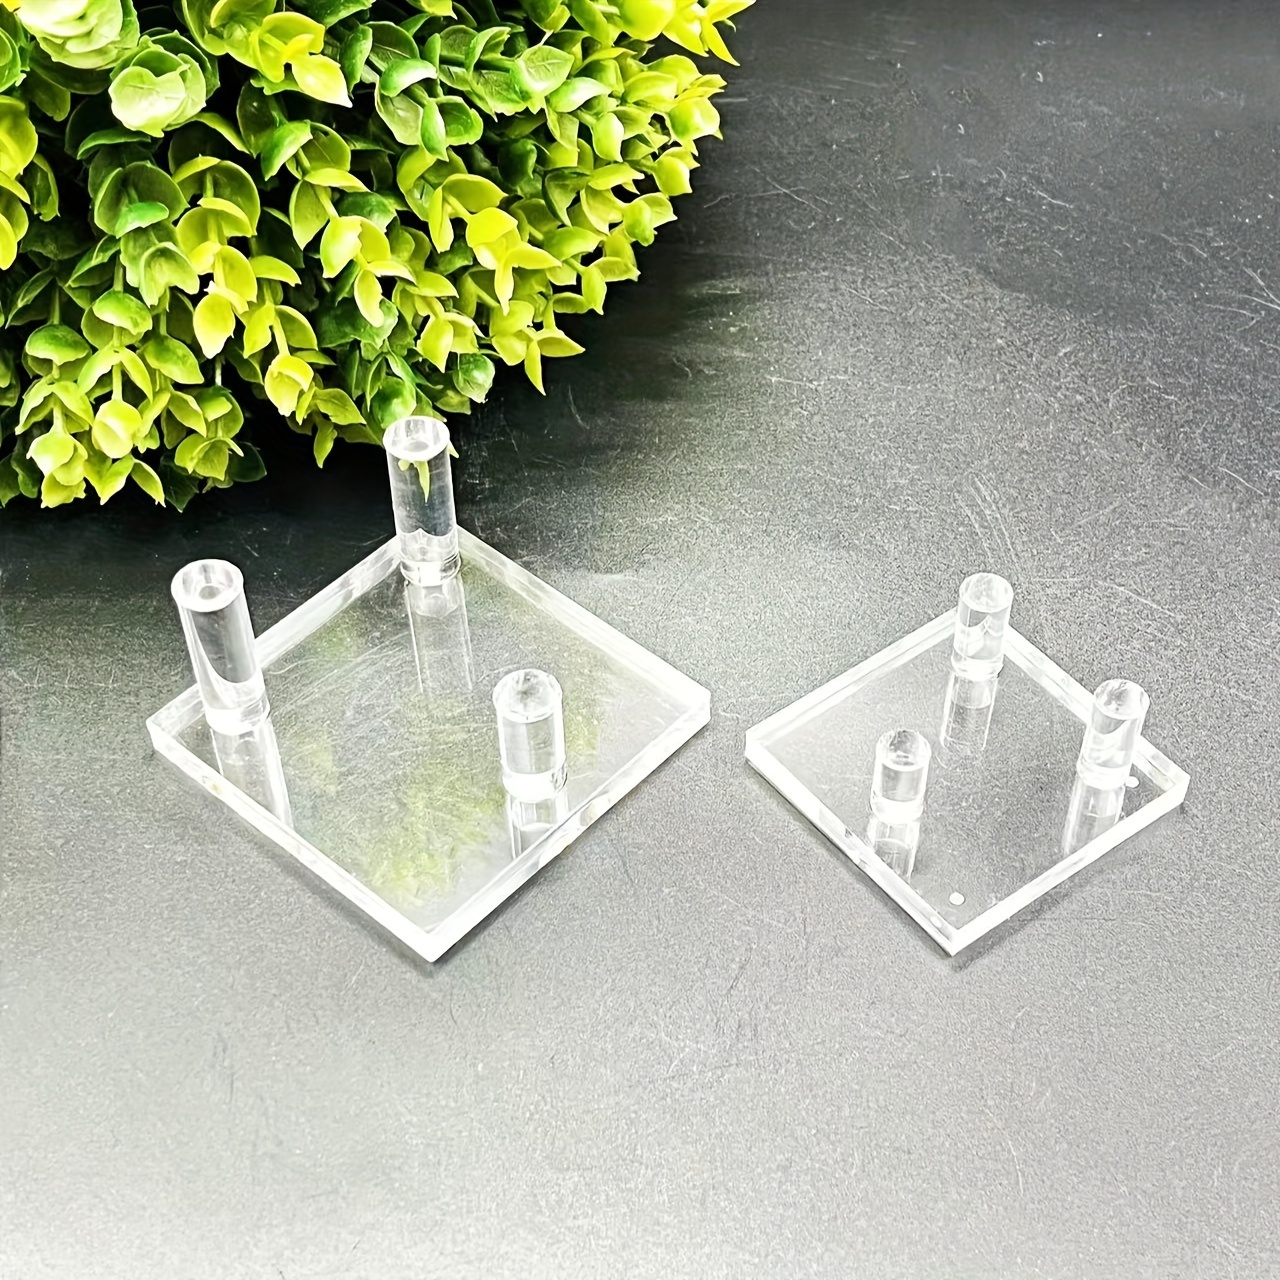 Clear Acrylic Display Stand - Three-Peg Display Easel Stands for